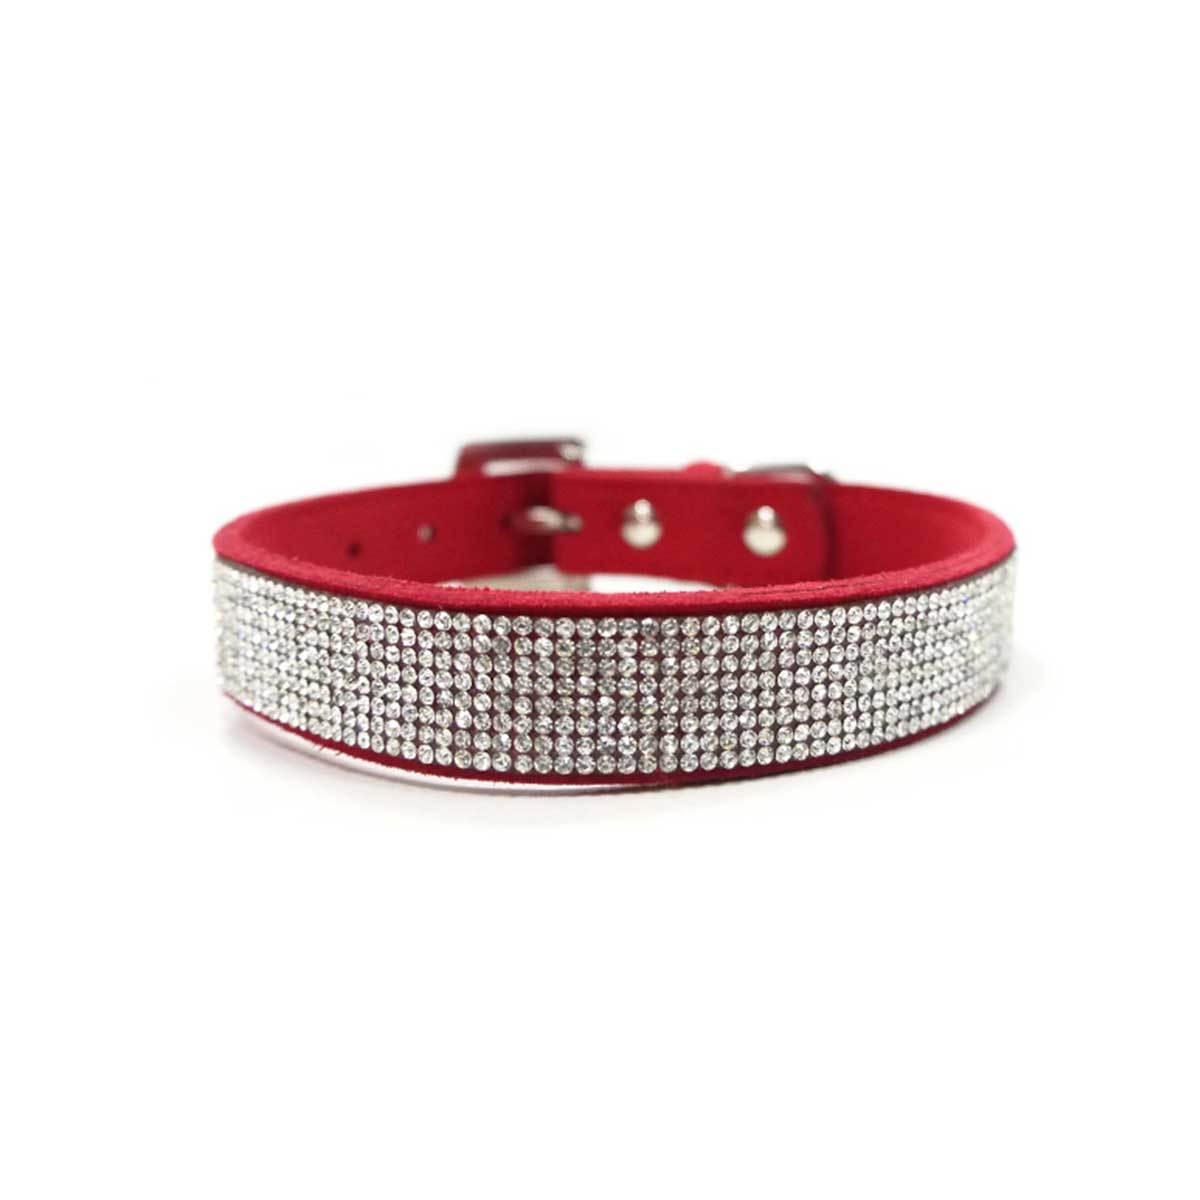 VIP Bling Collar in Red with Rhinestone Studded Buckle | Pawlicious & Company